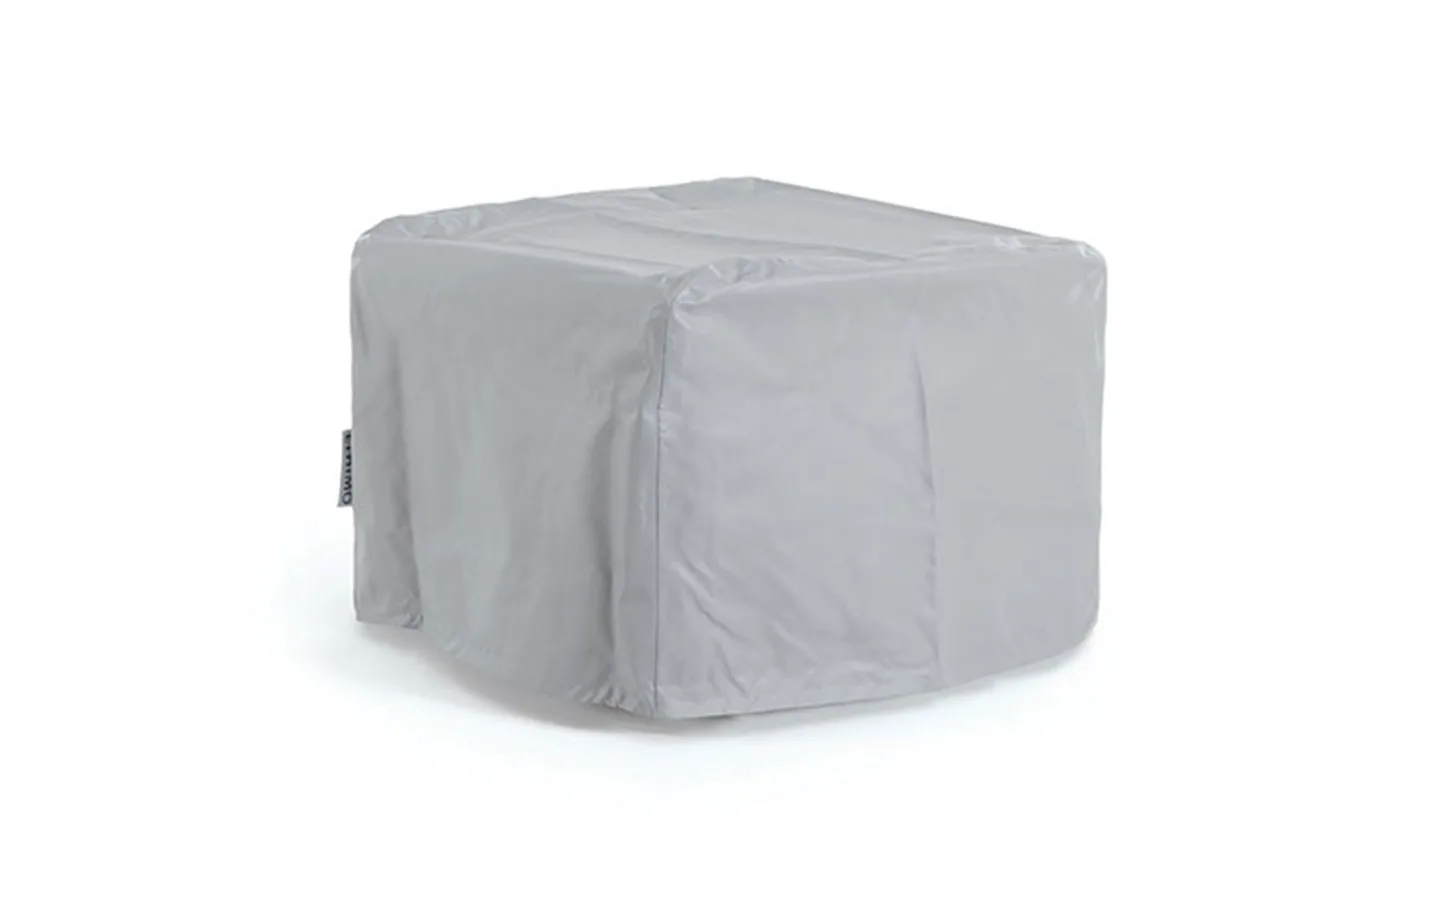 grand life round coffee table d77 rain cover